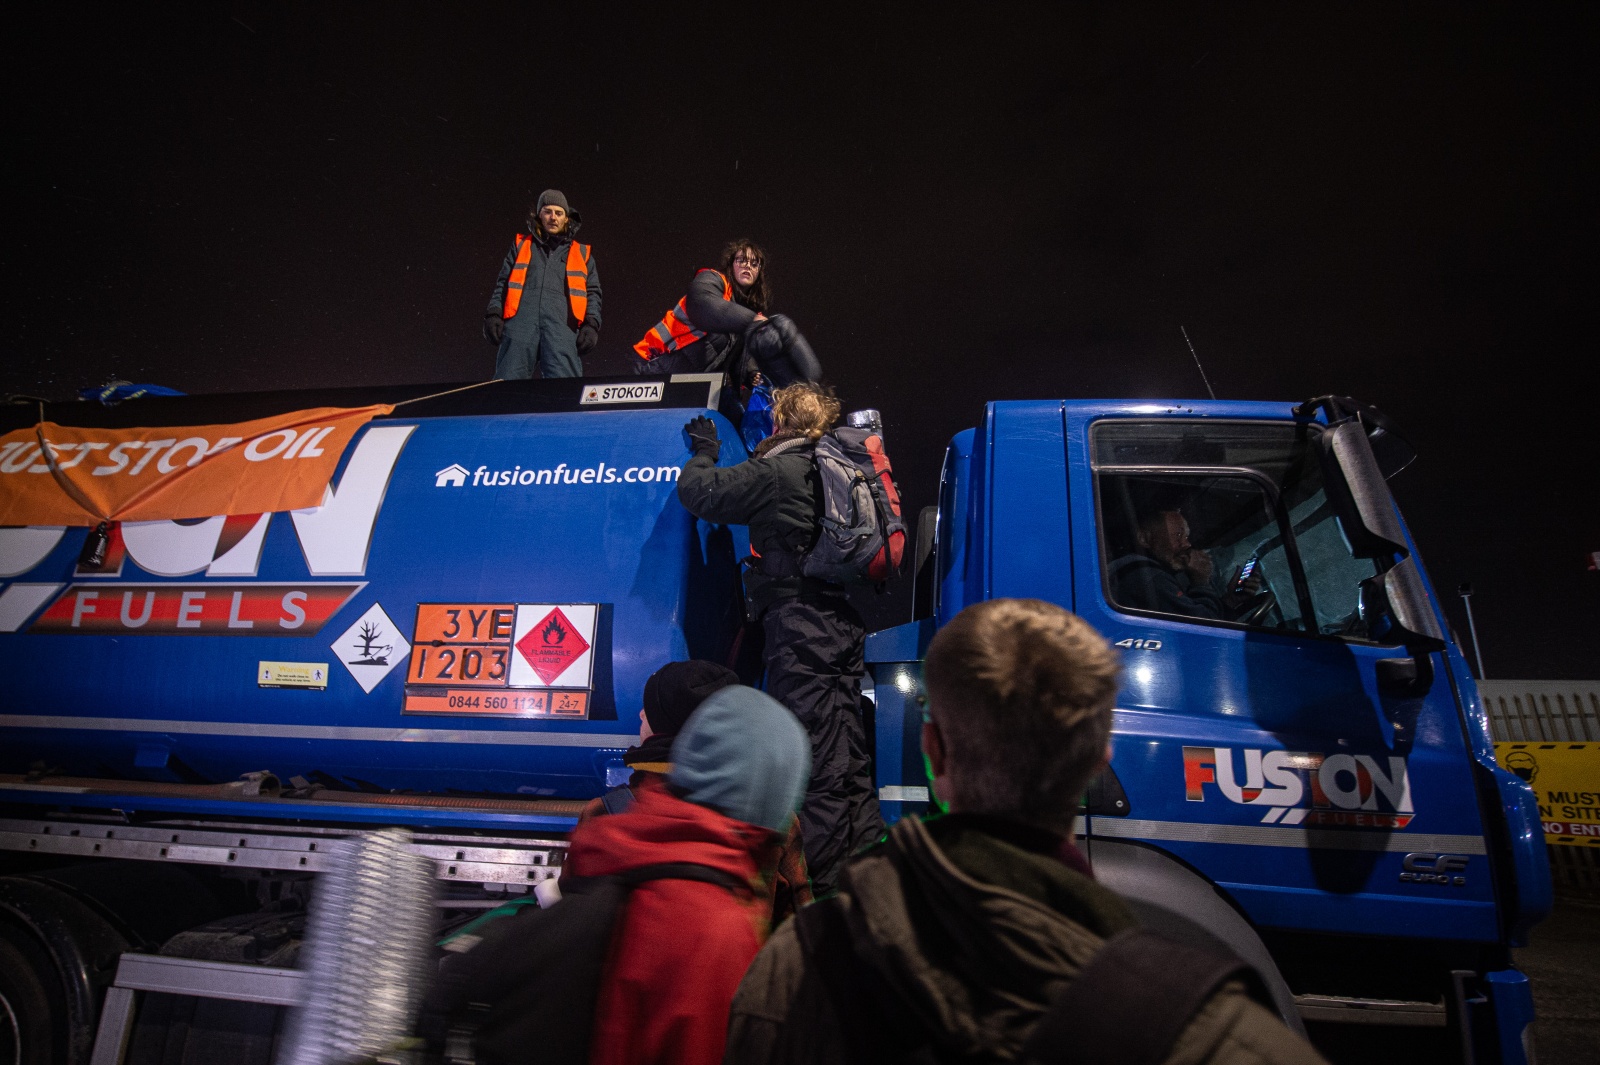 People climb on top of a fuel truck at night.